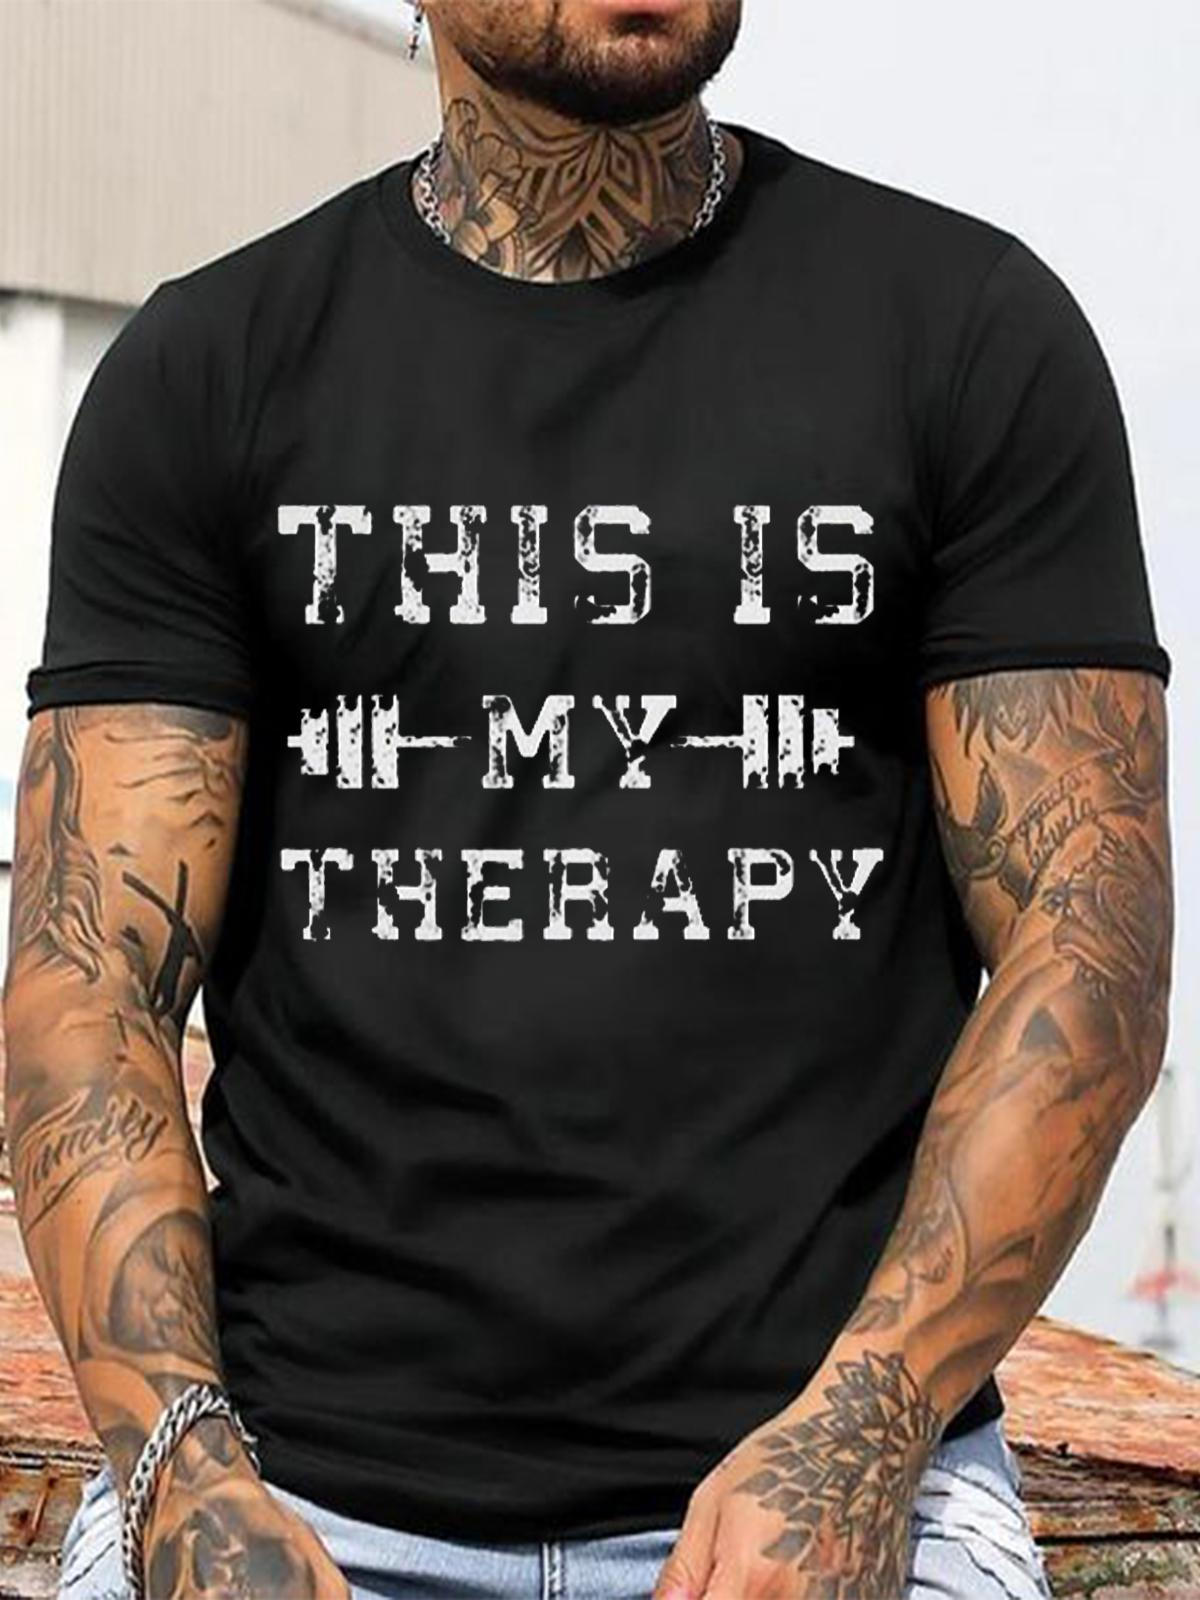 THIS IS MY THERAPY Round Neck Short Sleeve Men's T-shirt